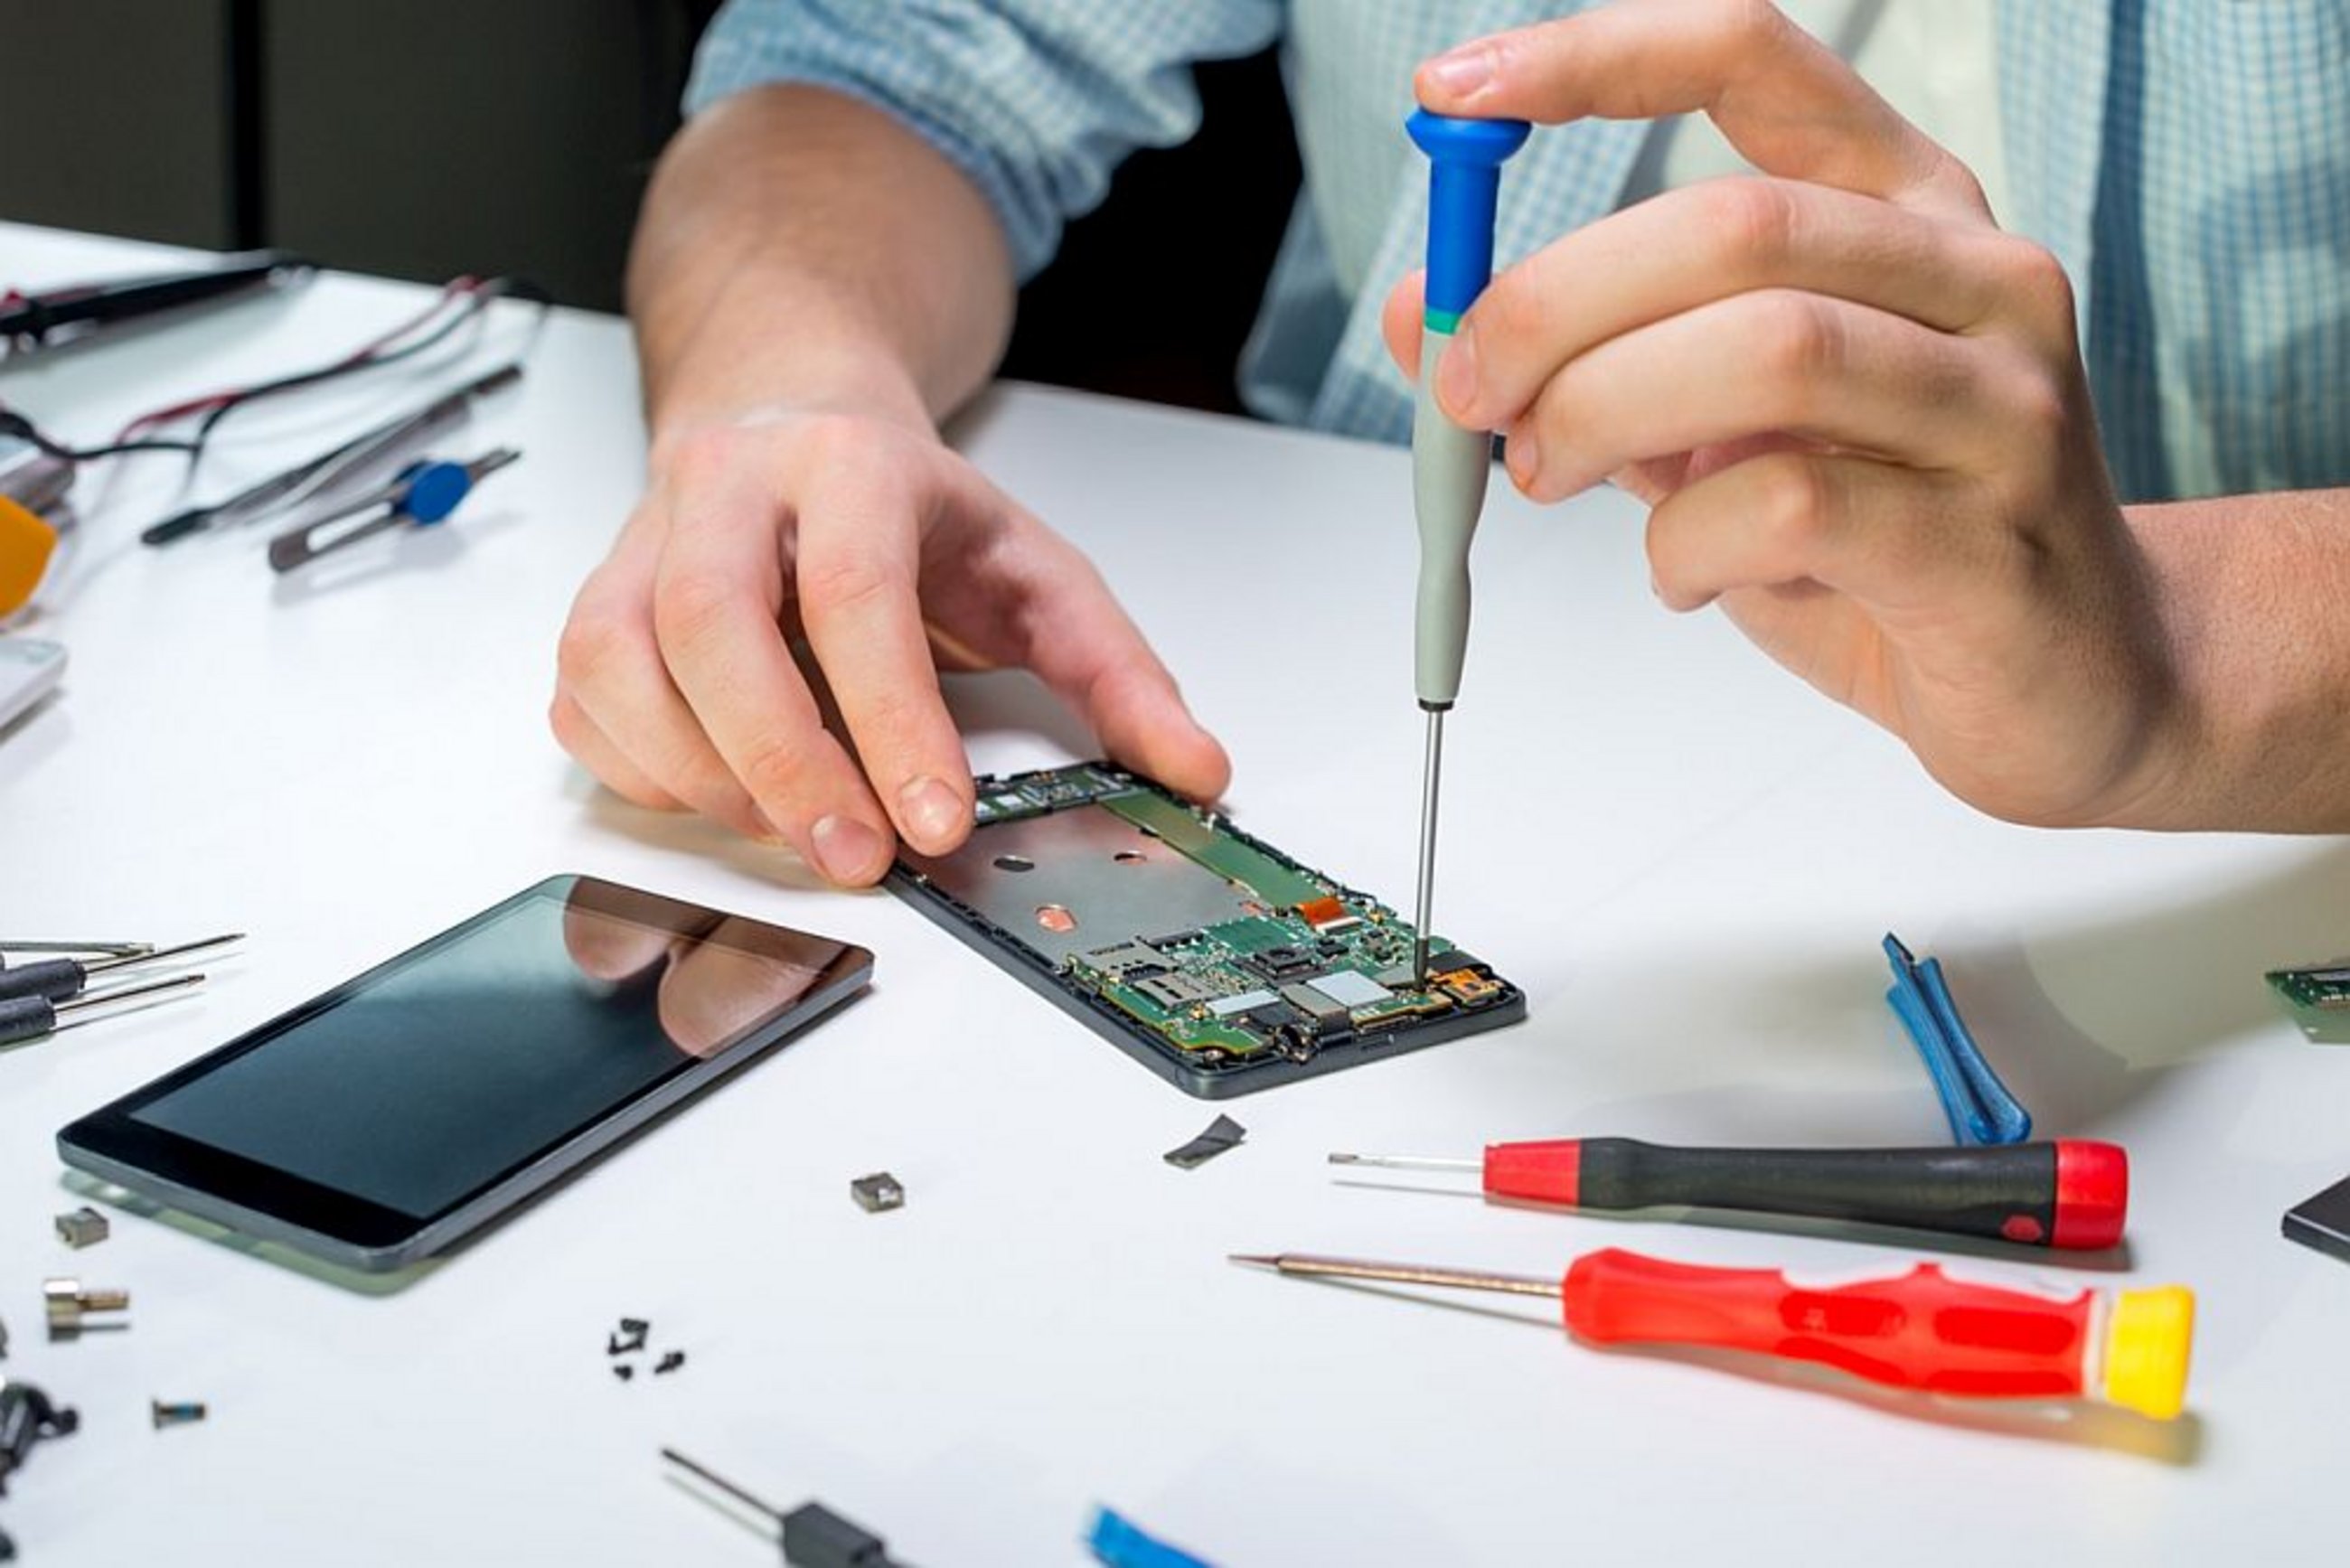 European Right to Repair (cepPolicyBrief)